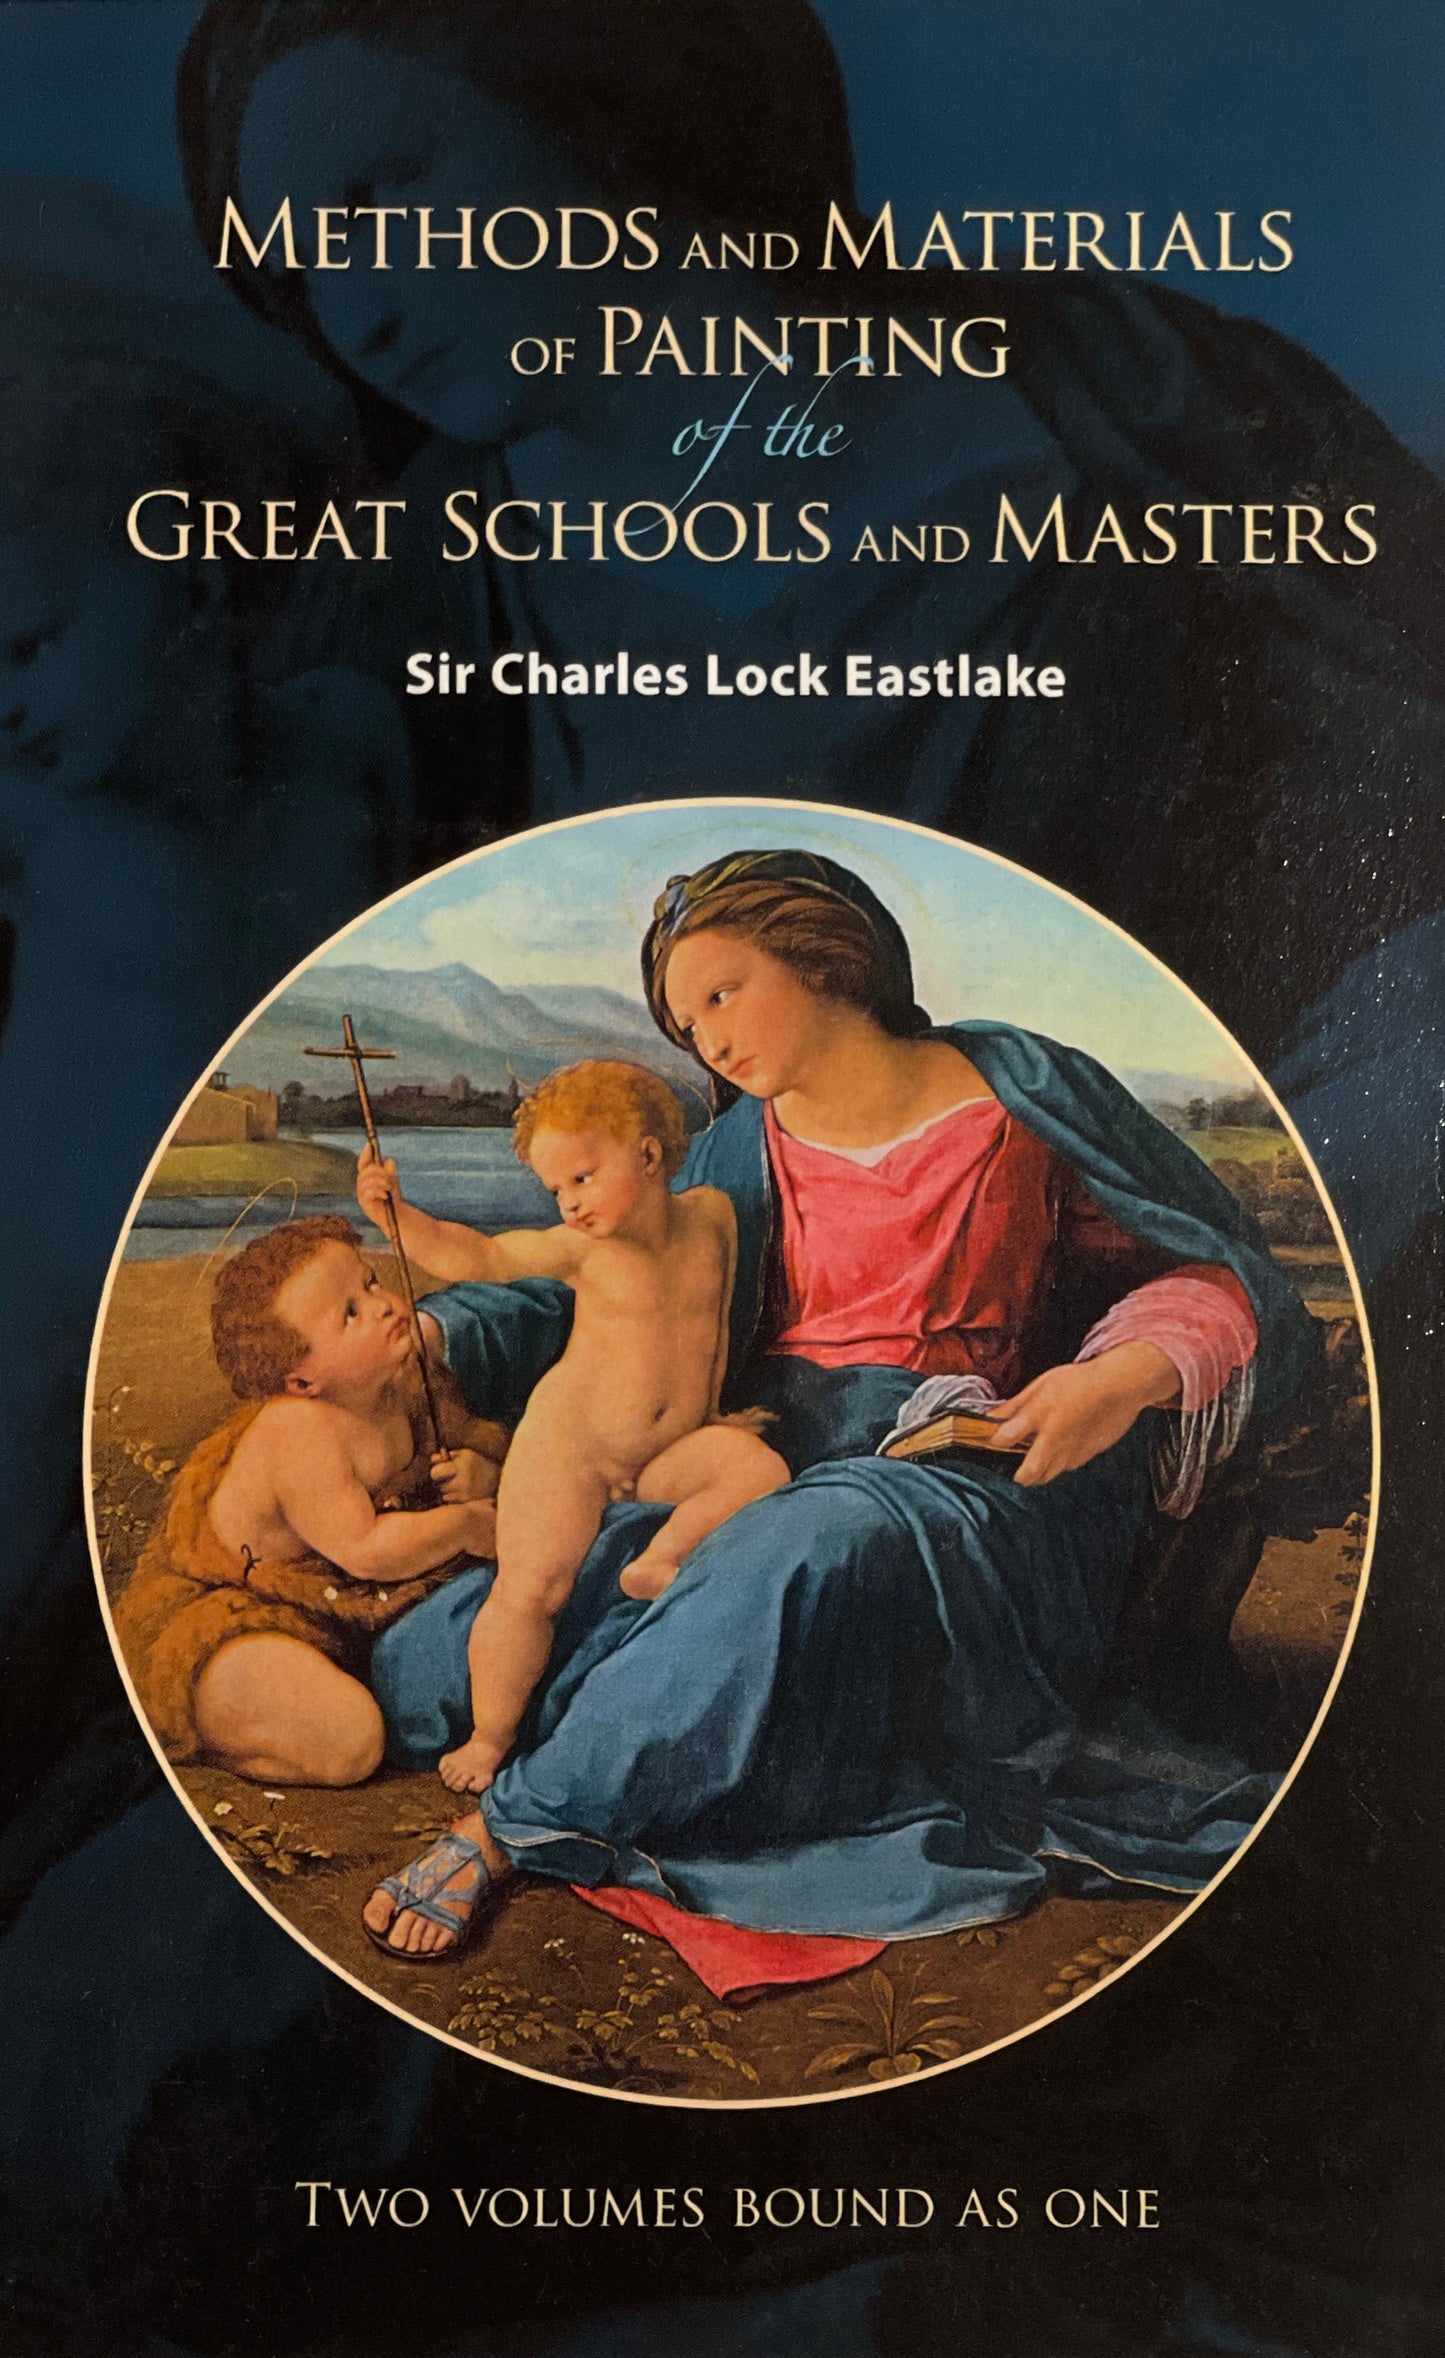 Eastlake, Sir Charles Lock "Methods and Materials of Painting of the Great Schools and Masters"